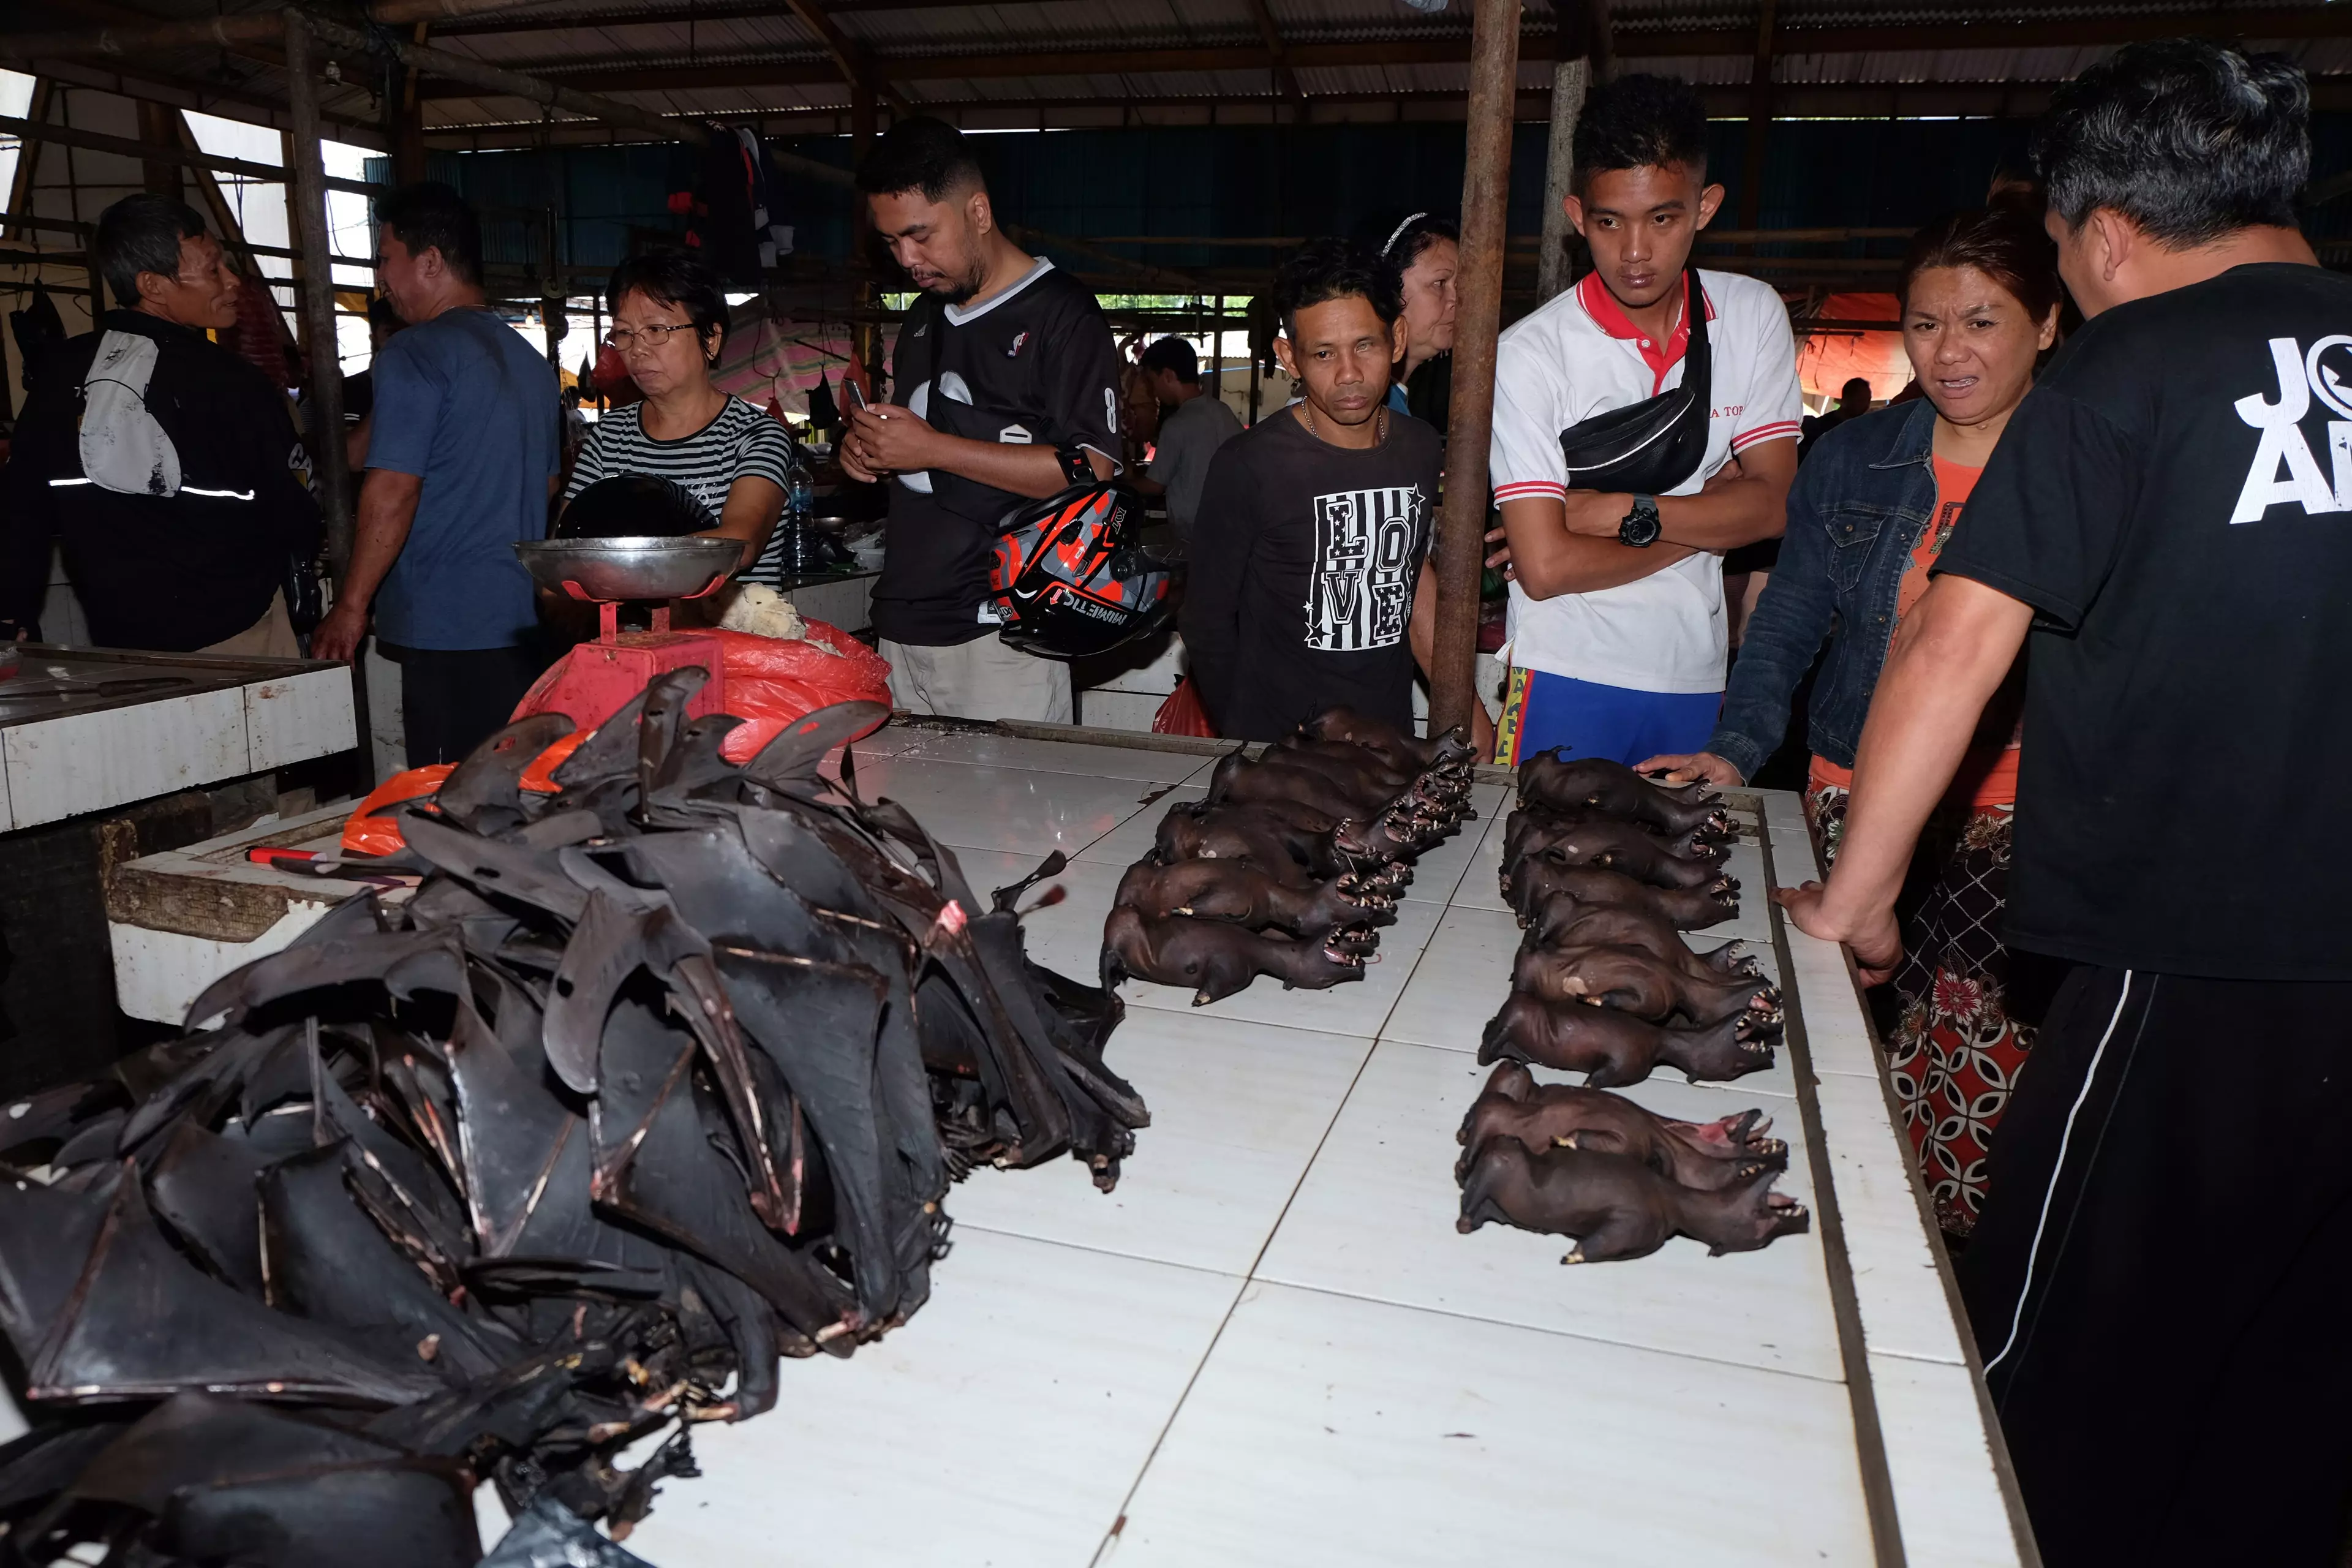 More bats are butchered for sale.